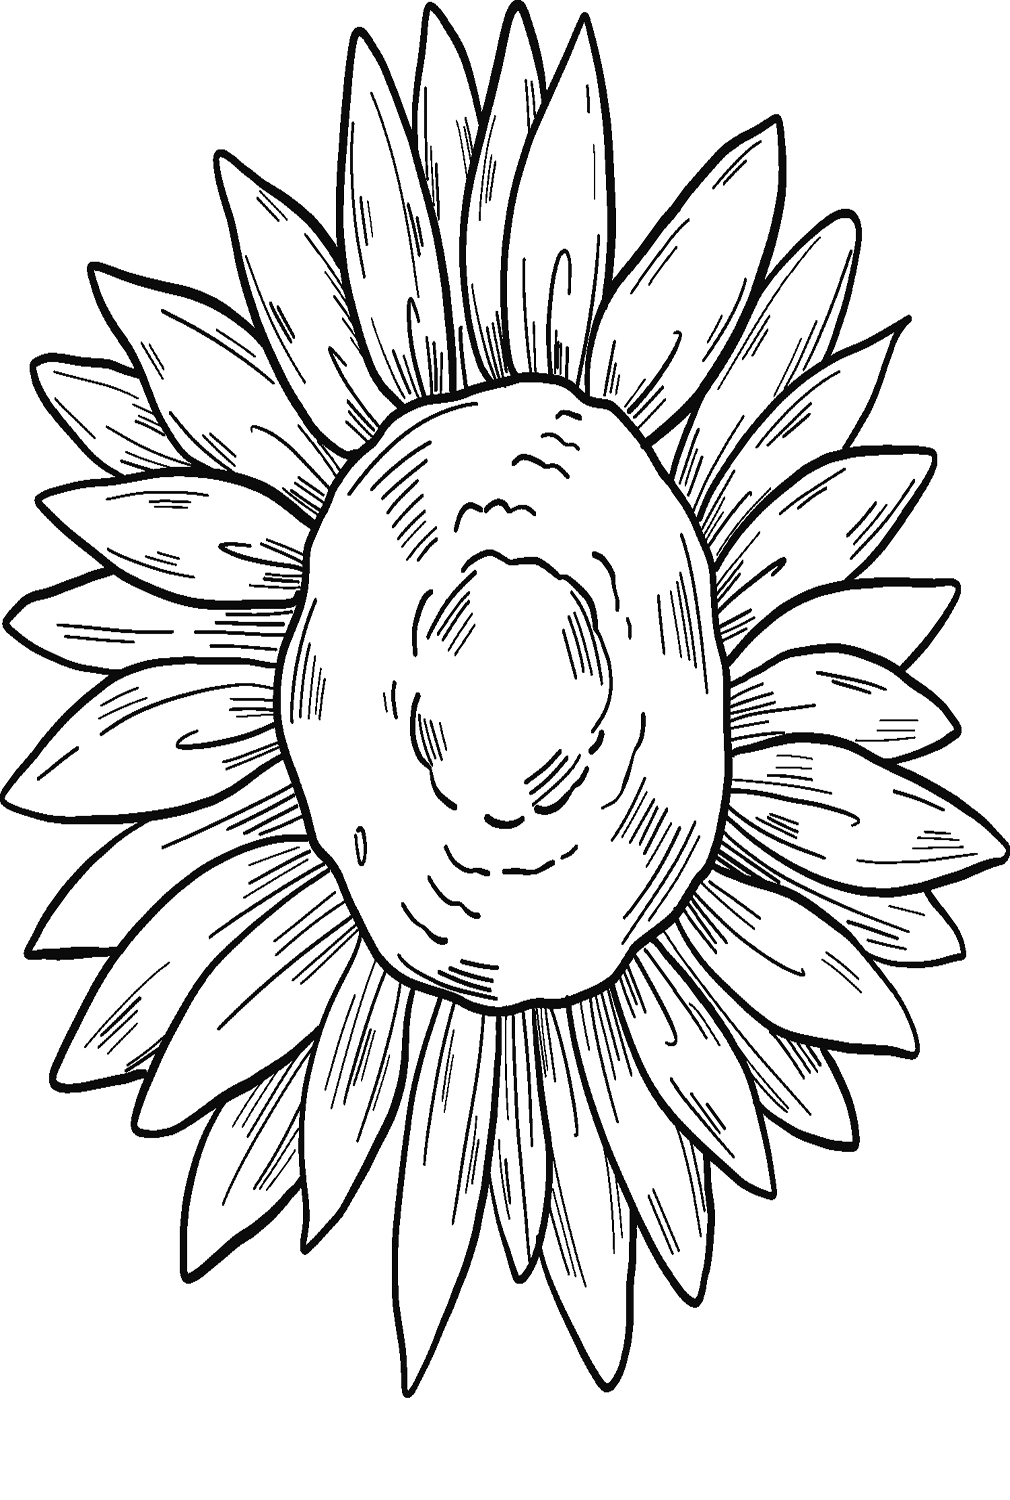 Sunflower Picture from Sunflower